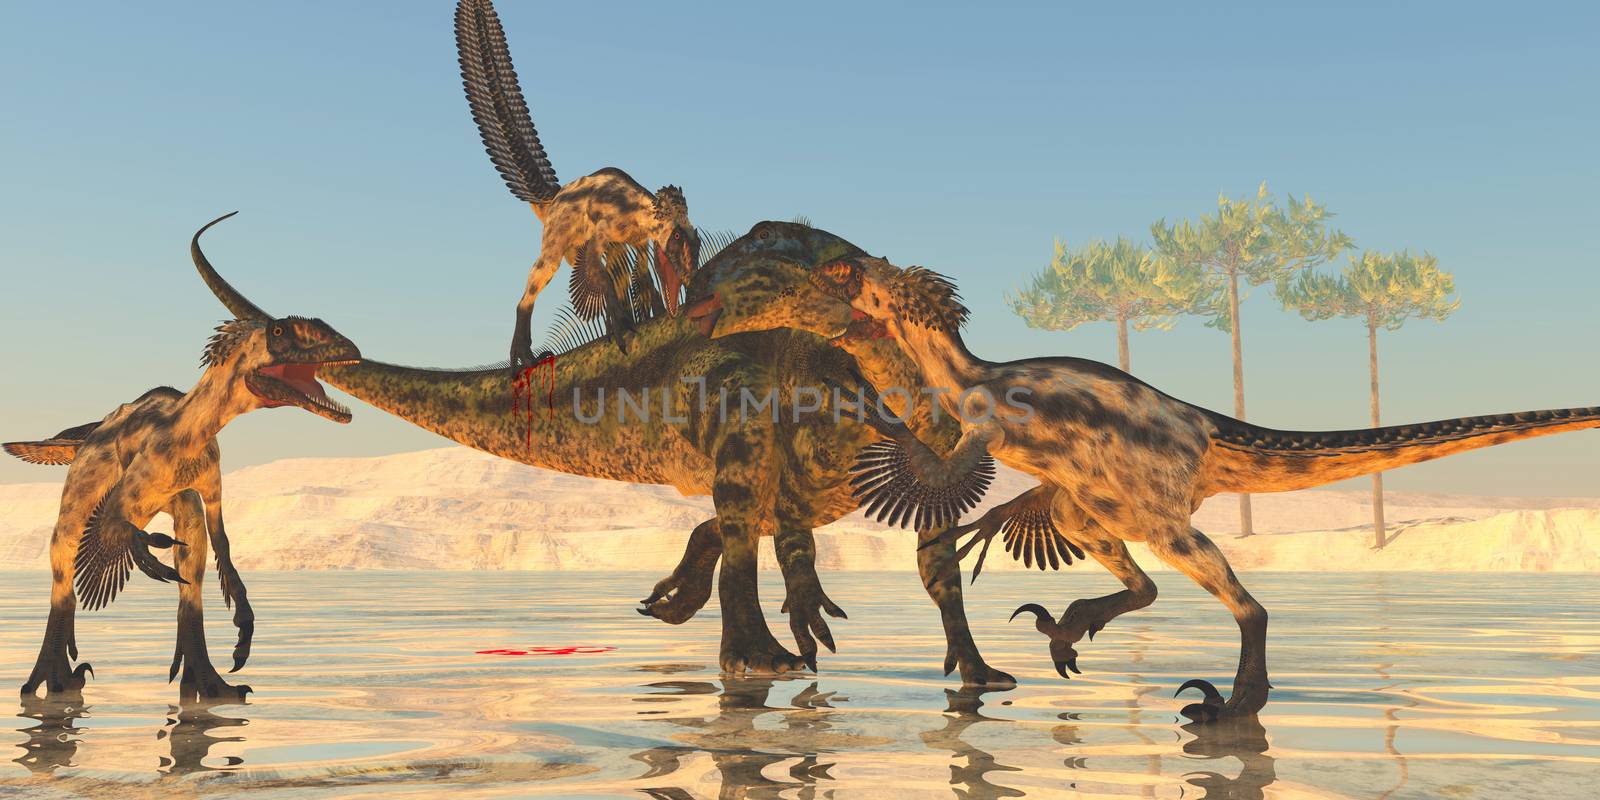 A pack of Deinonychus dinosaurs attack a Tenontosaurus during the Cretaceous Period of North America.